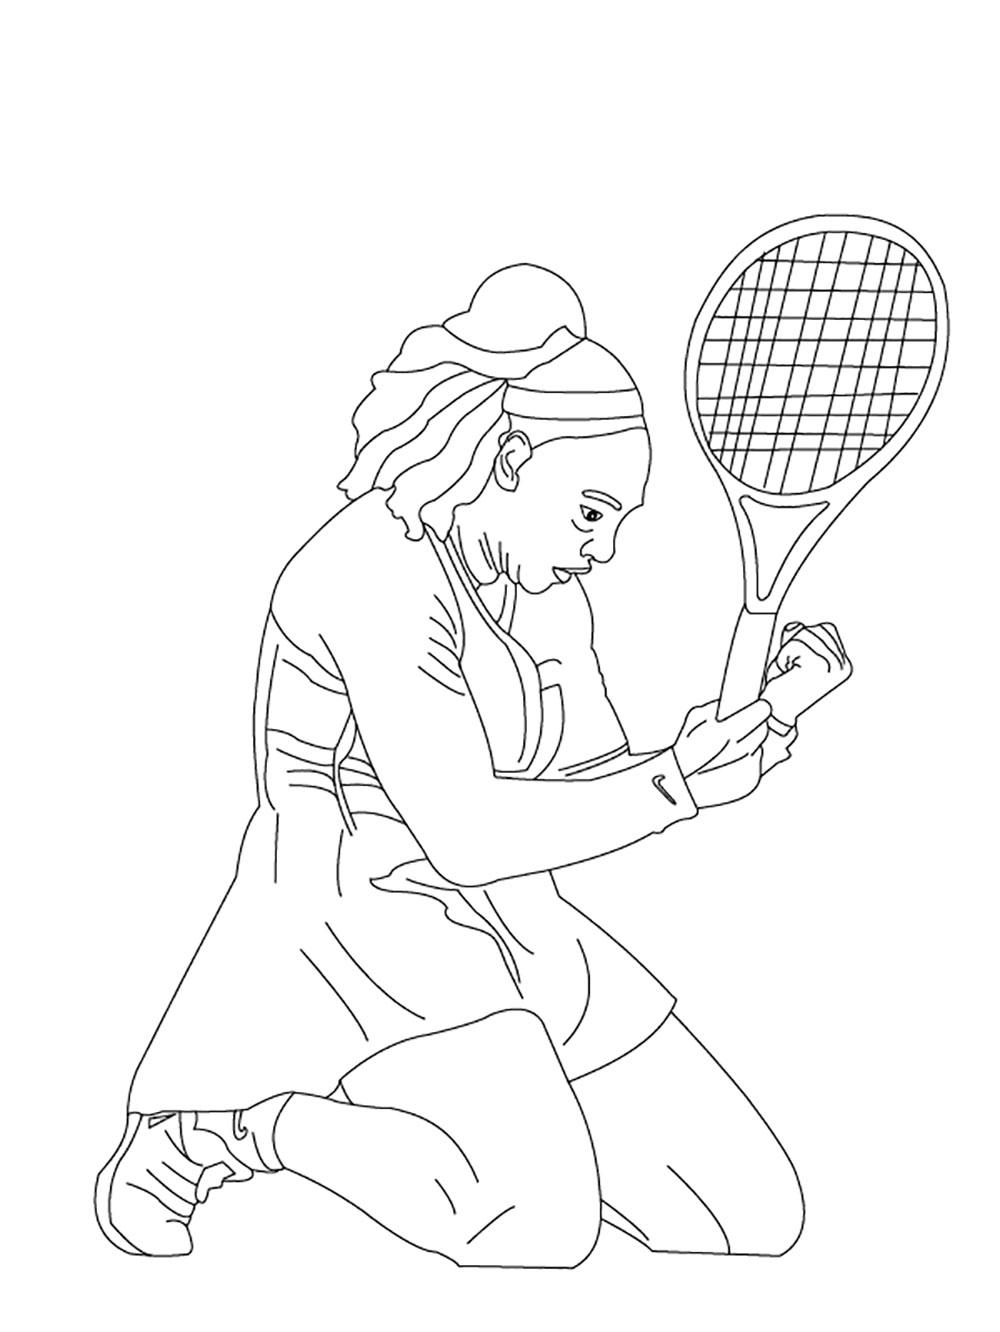 Serena williams coloring pages